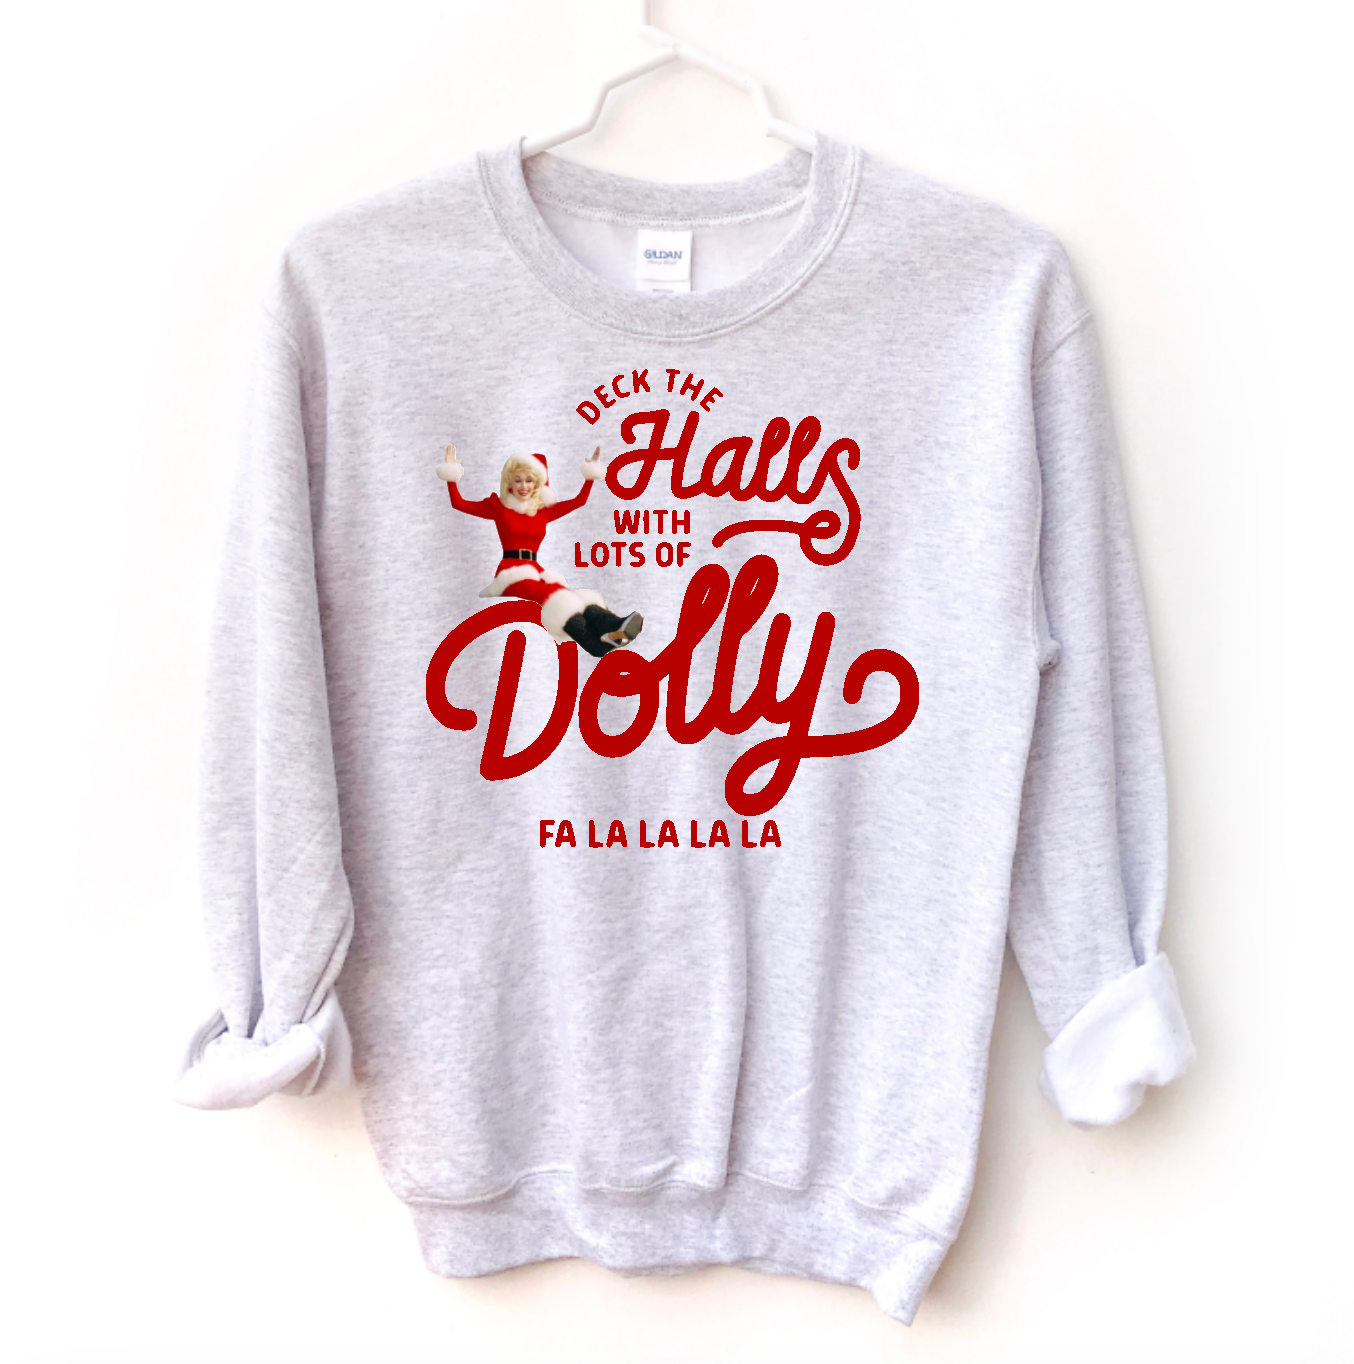 Deck the Halls with Lots of Dolly crewneck sweatshirt - YOUTH